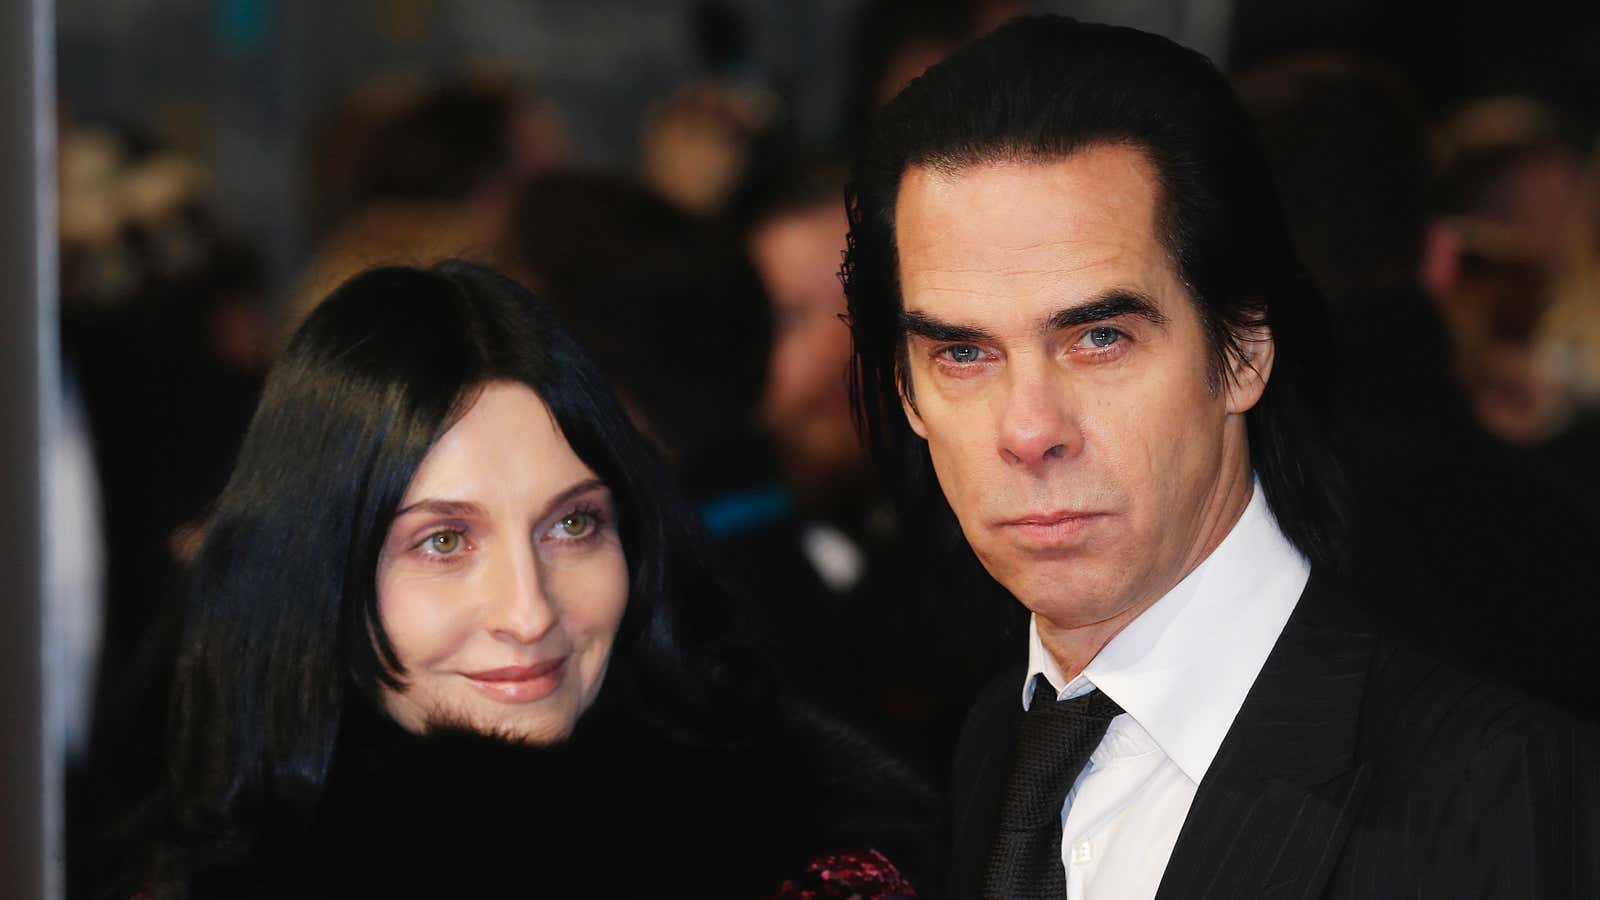 Nick Cave and Susie Bick, months before their son’s death in 2015.